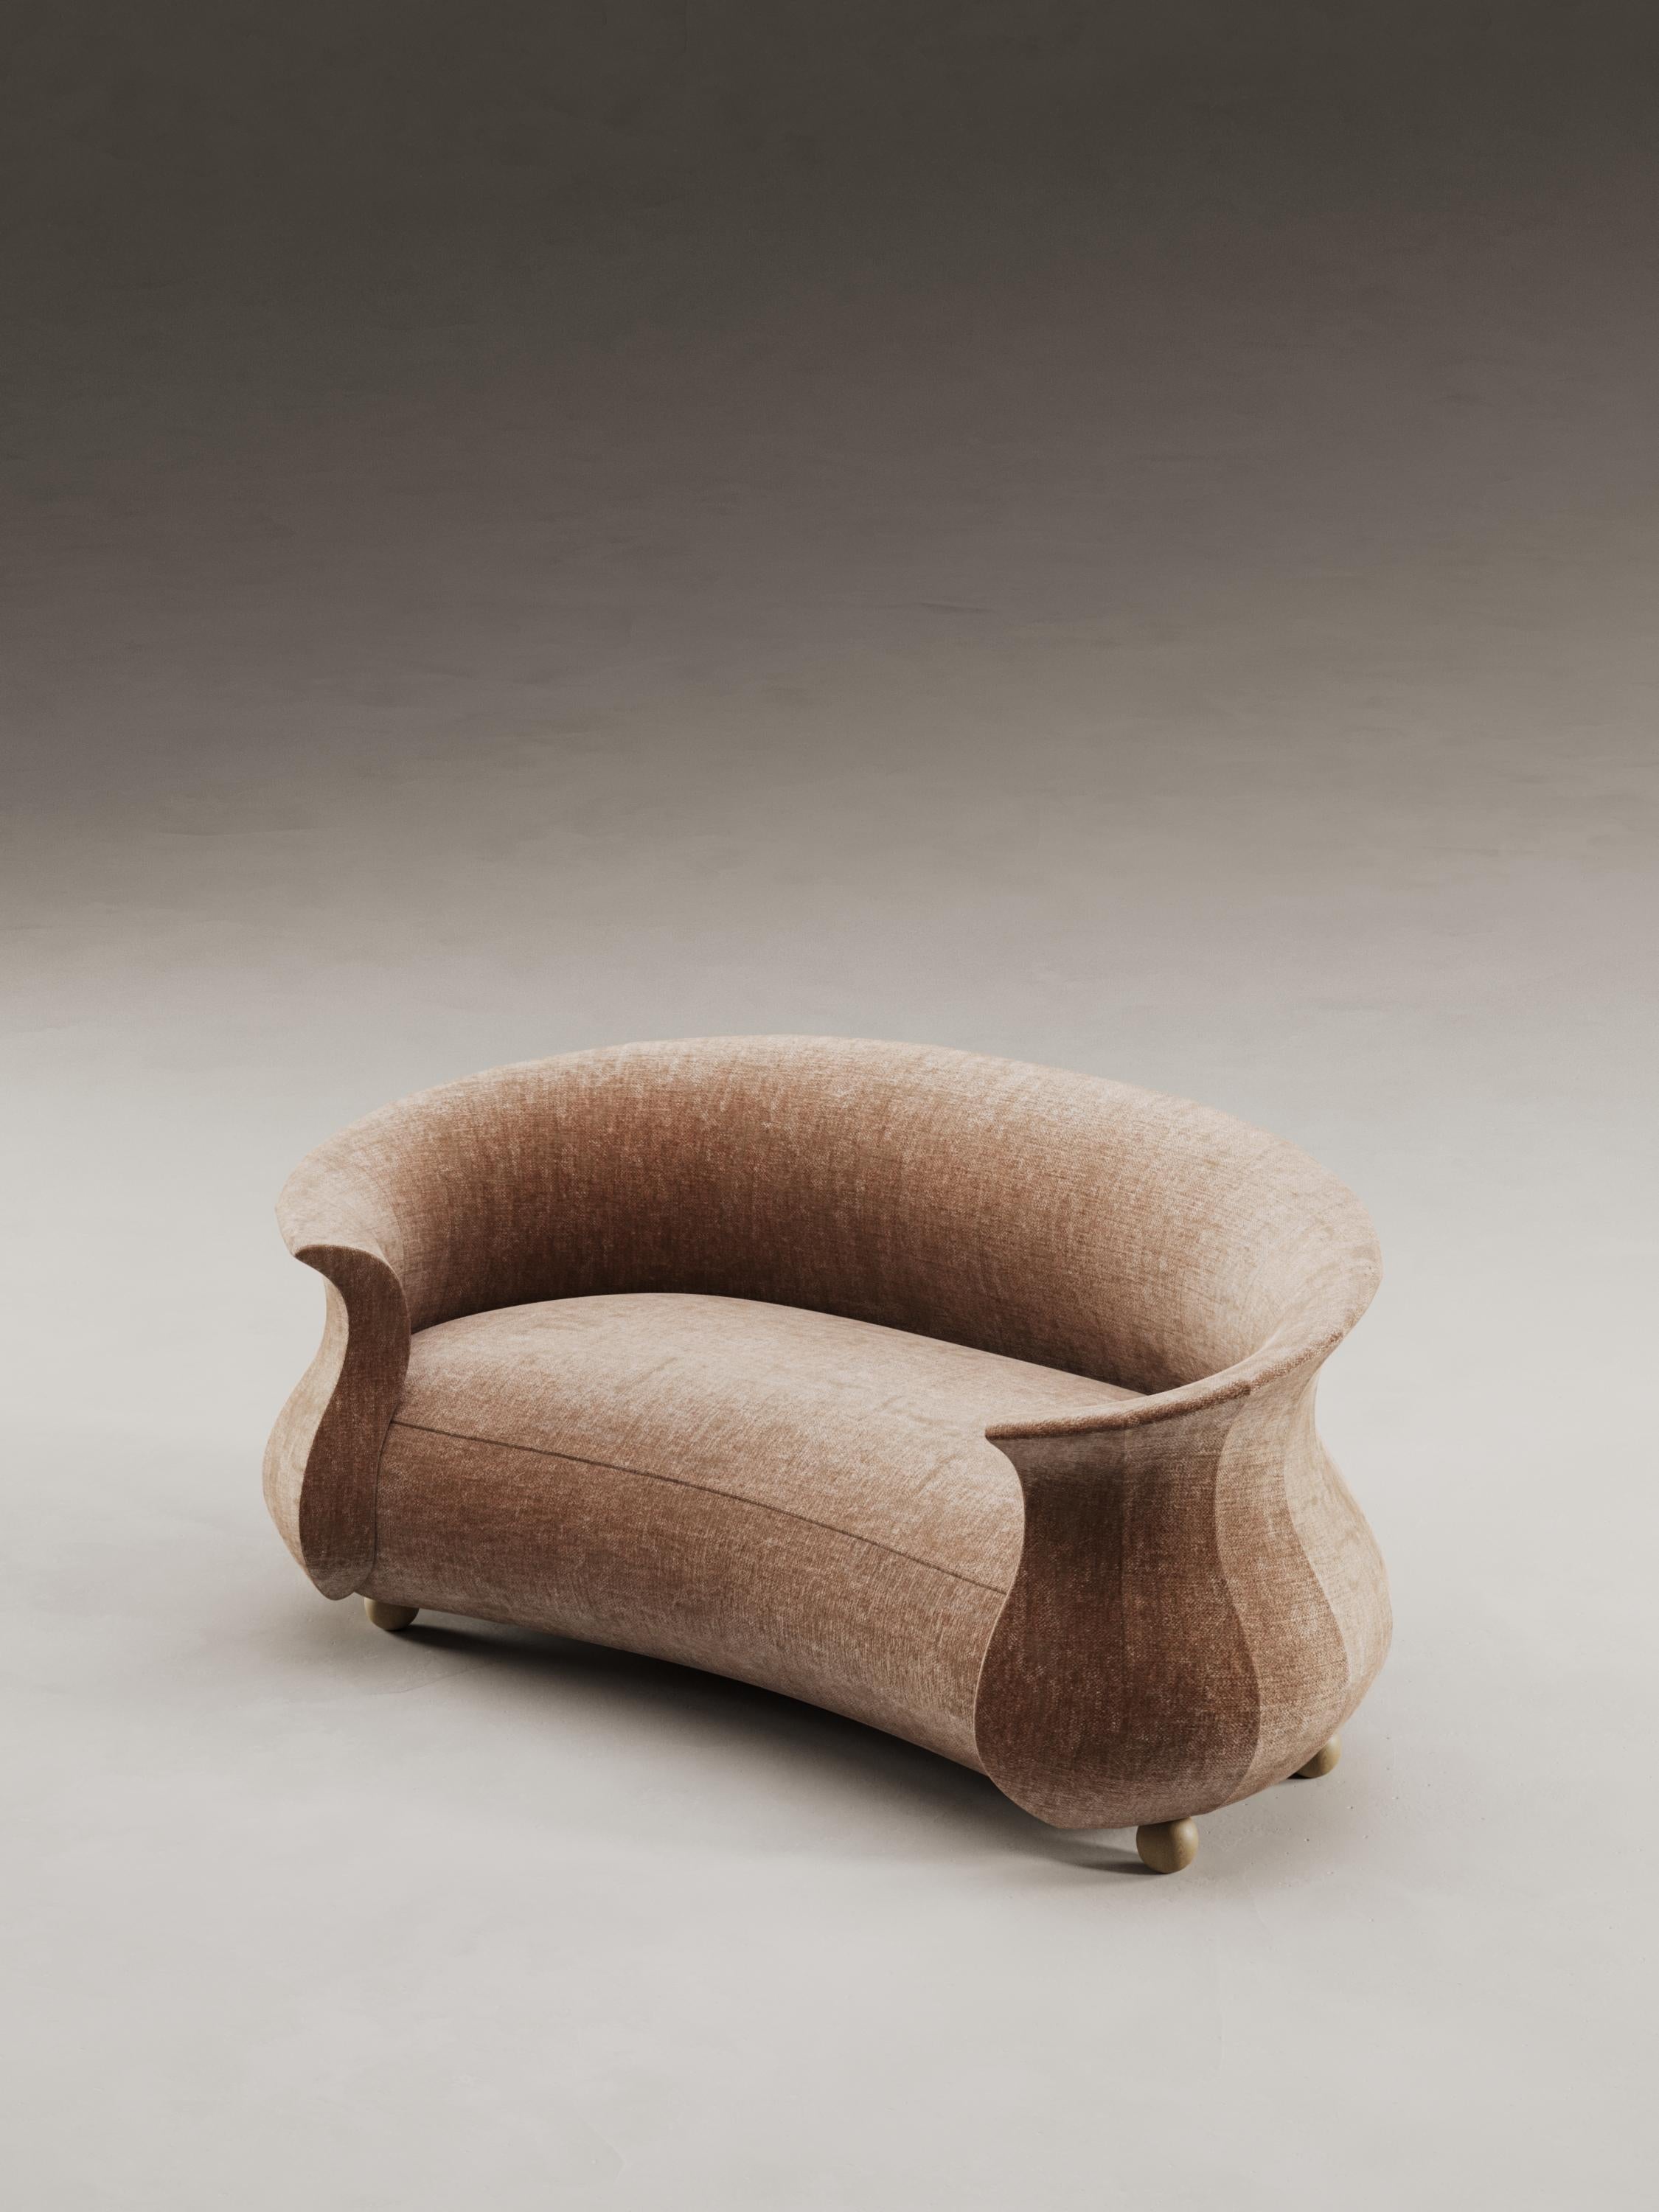 Contemporary Sculptural Organic Mid Century style Curved Amphora Sofa For Sale 2